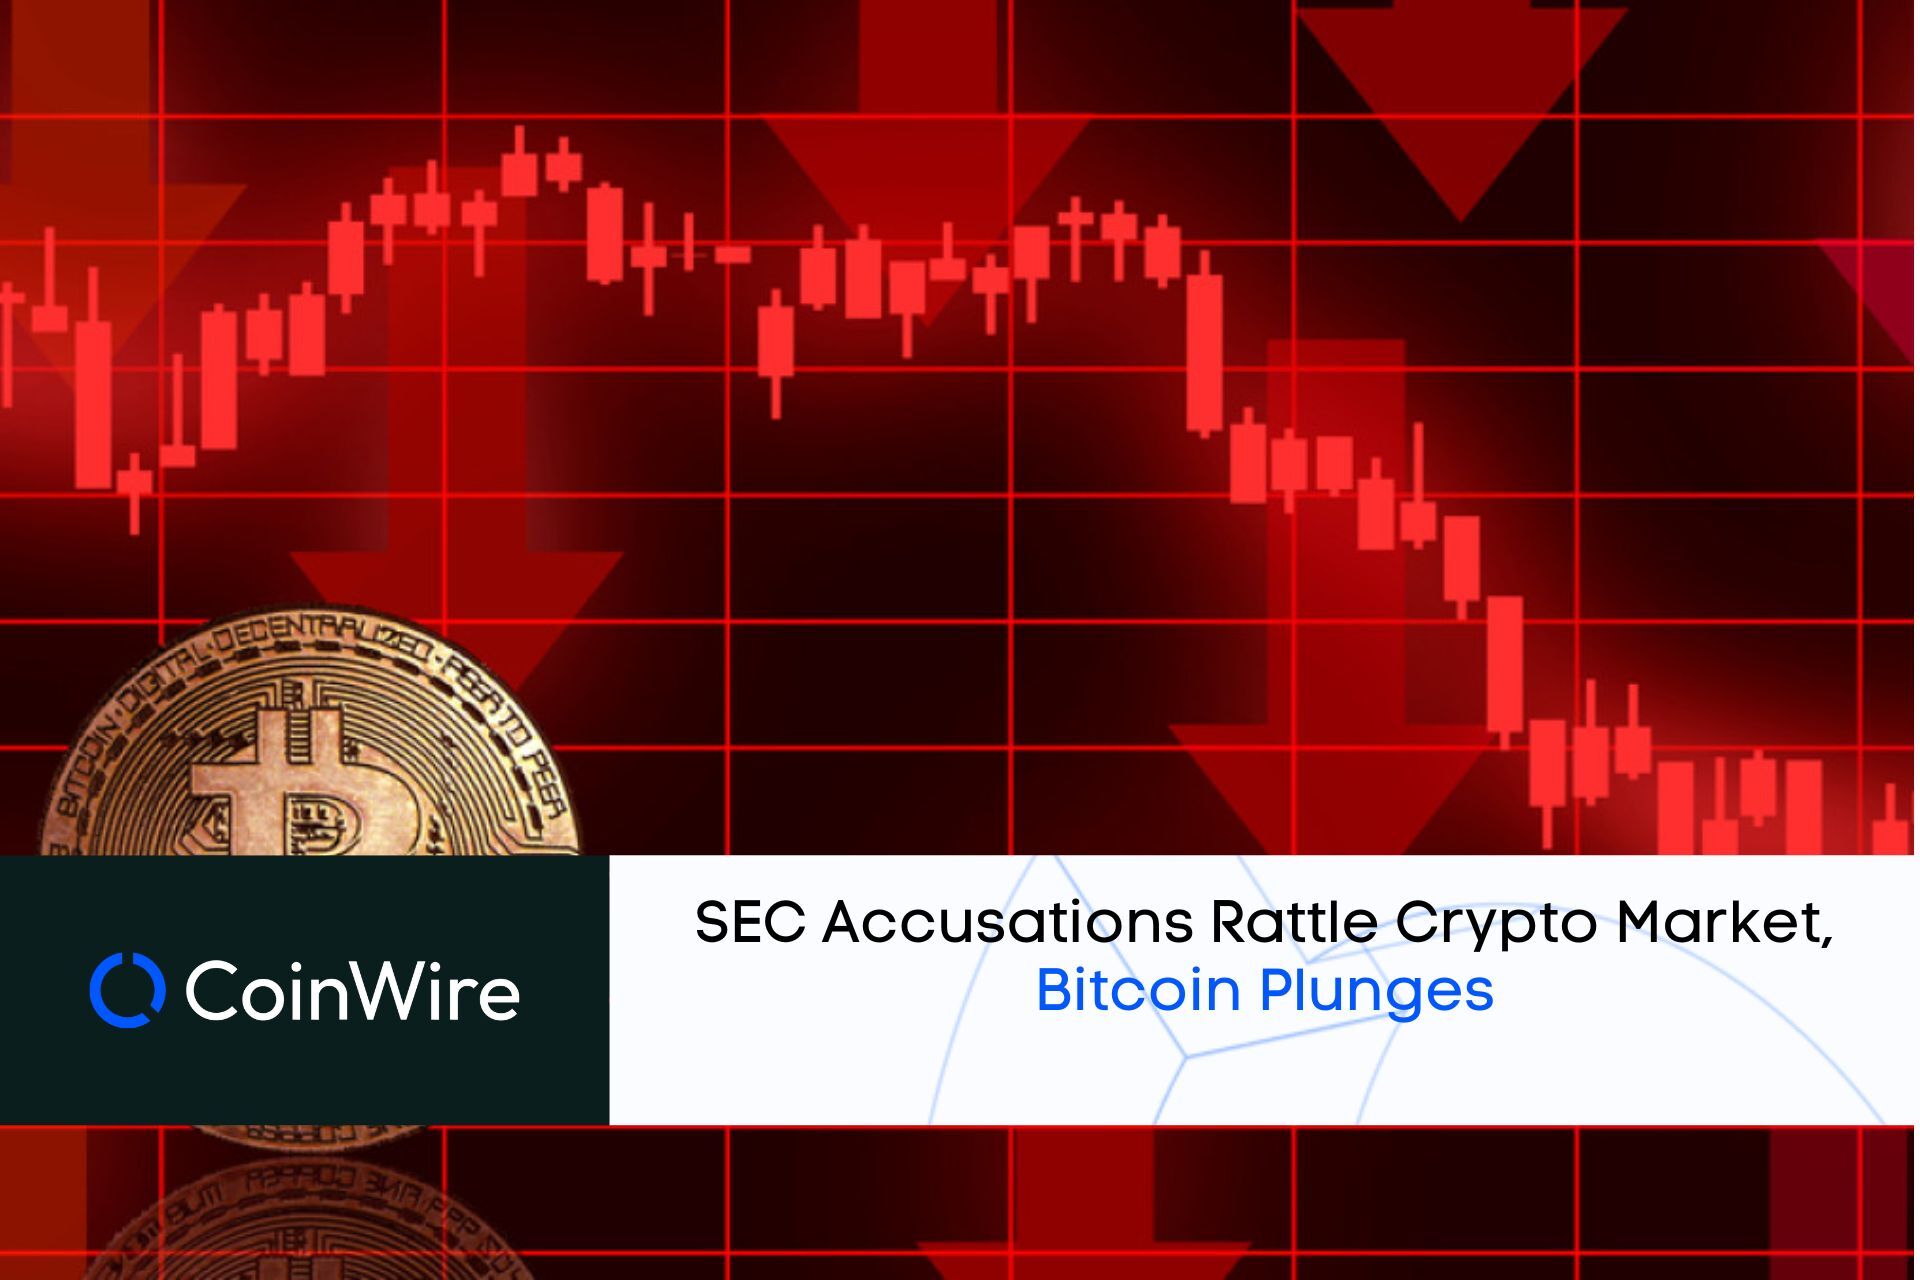 Sec Accusations Rattle Crypto Market, Bitcoin Plunges